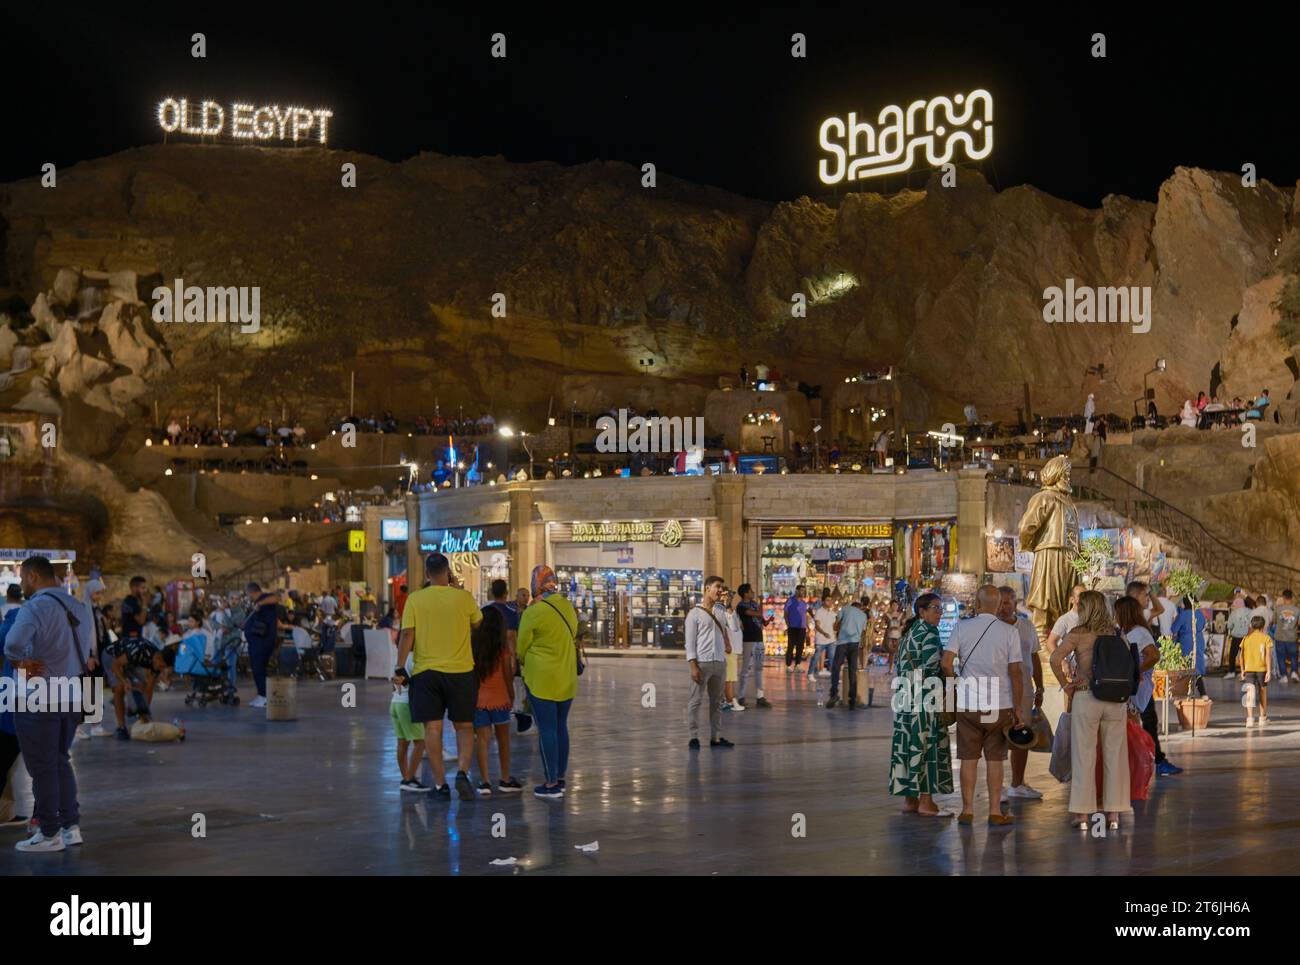 The Old Market in Sharm El Sheikh, Egypt, is a traditional market dating back to ancient times, Night view. Stock Photo